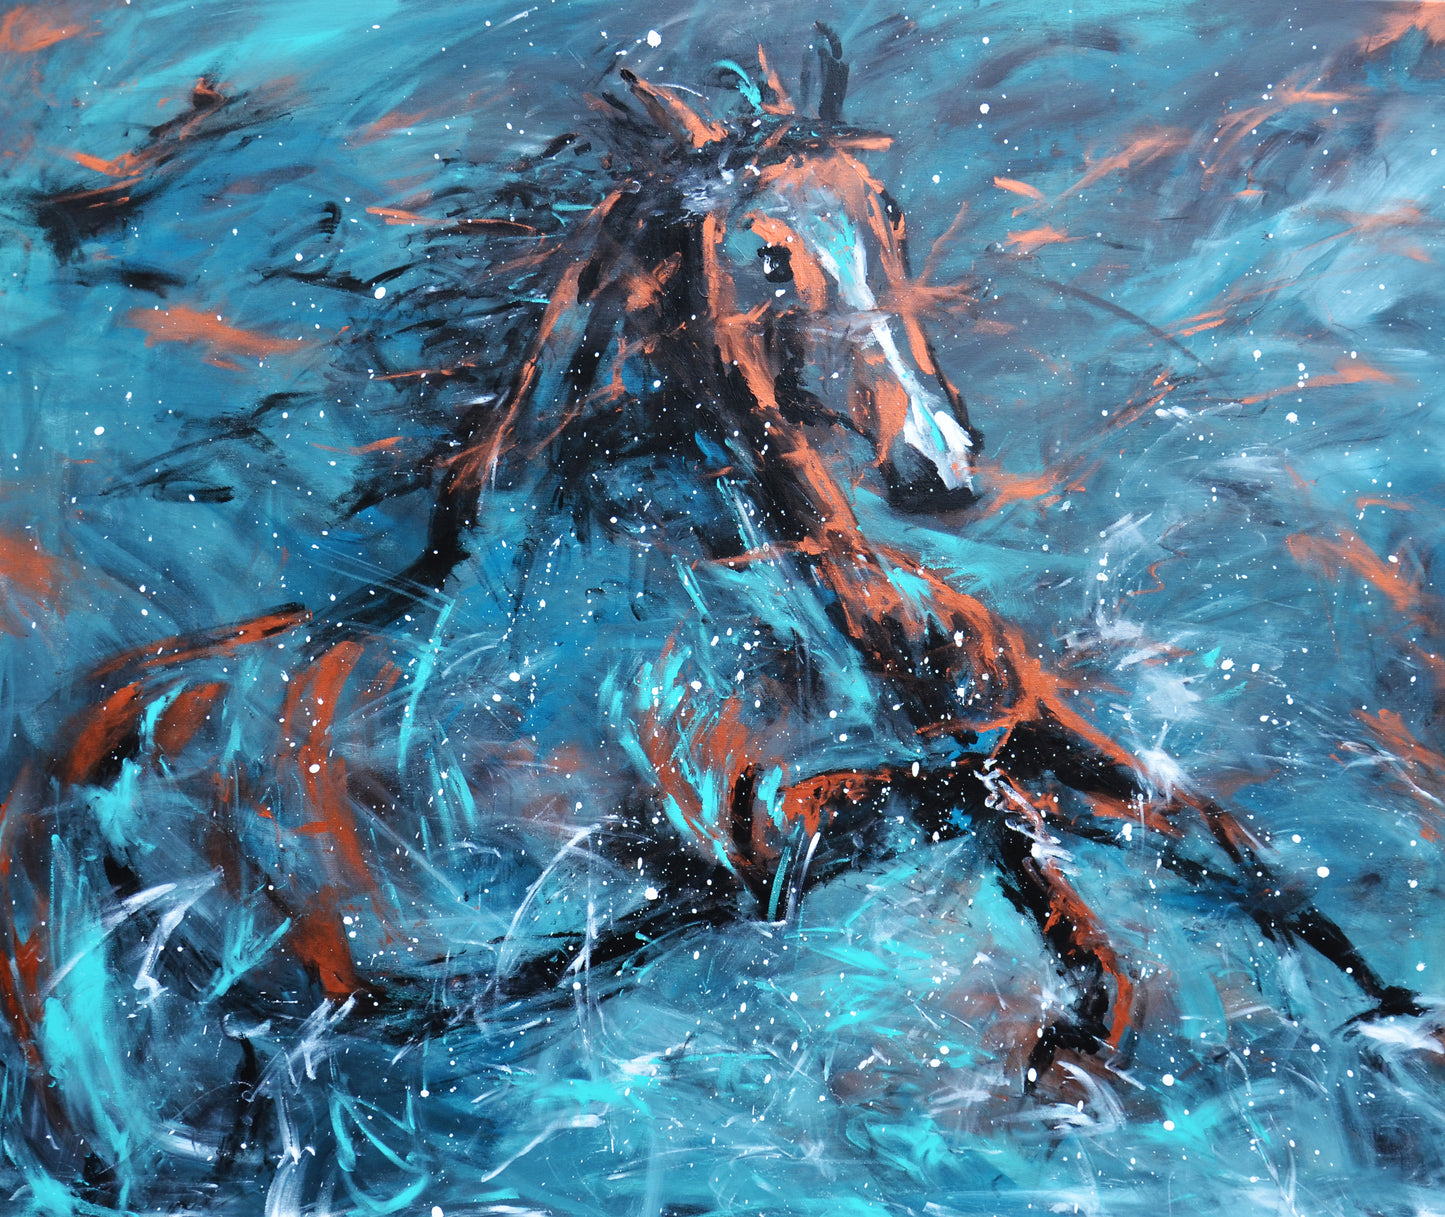 Abstract stallion horse art canvas print painting with artistic feeling